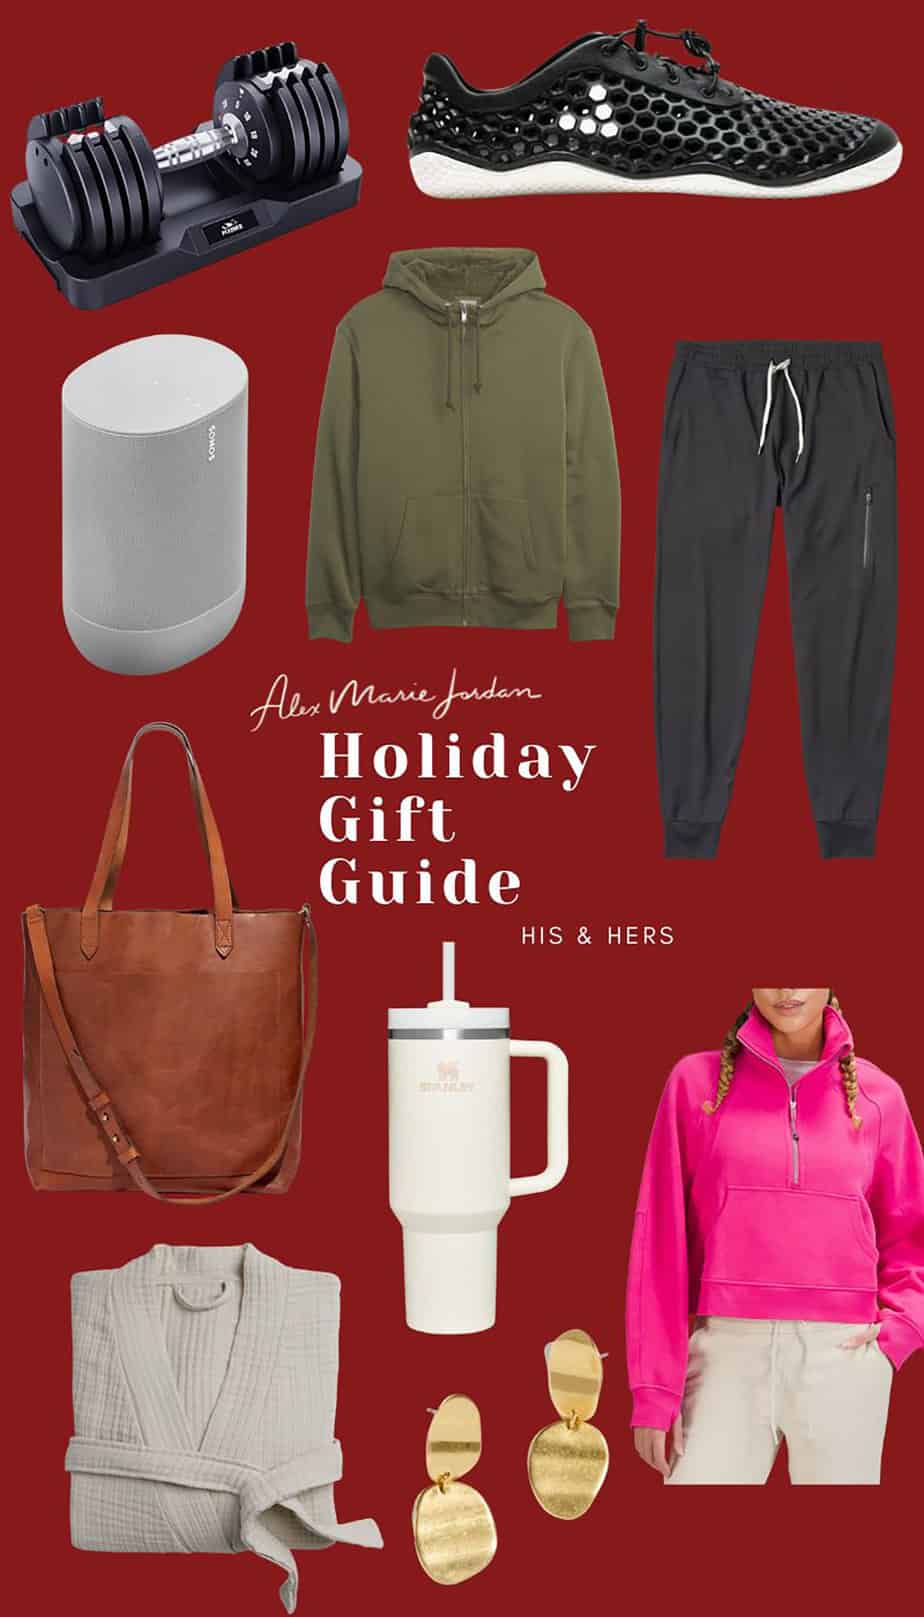 holiday gift guide for him and her featuring adjustable dumbbells, sneakers, leather bag, sweatshirts, cozy robe, earrings, and speaker.